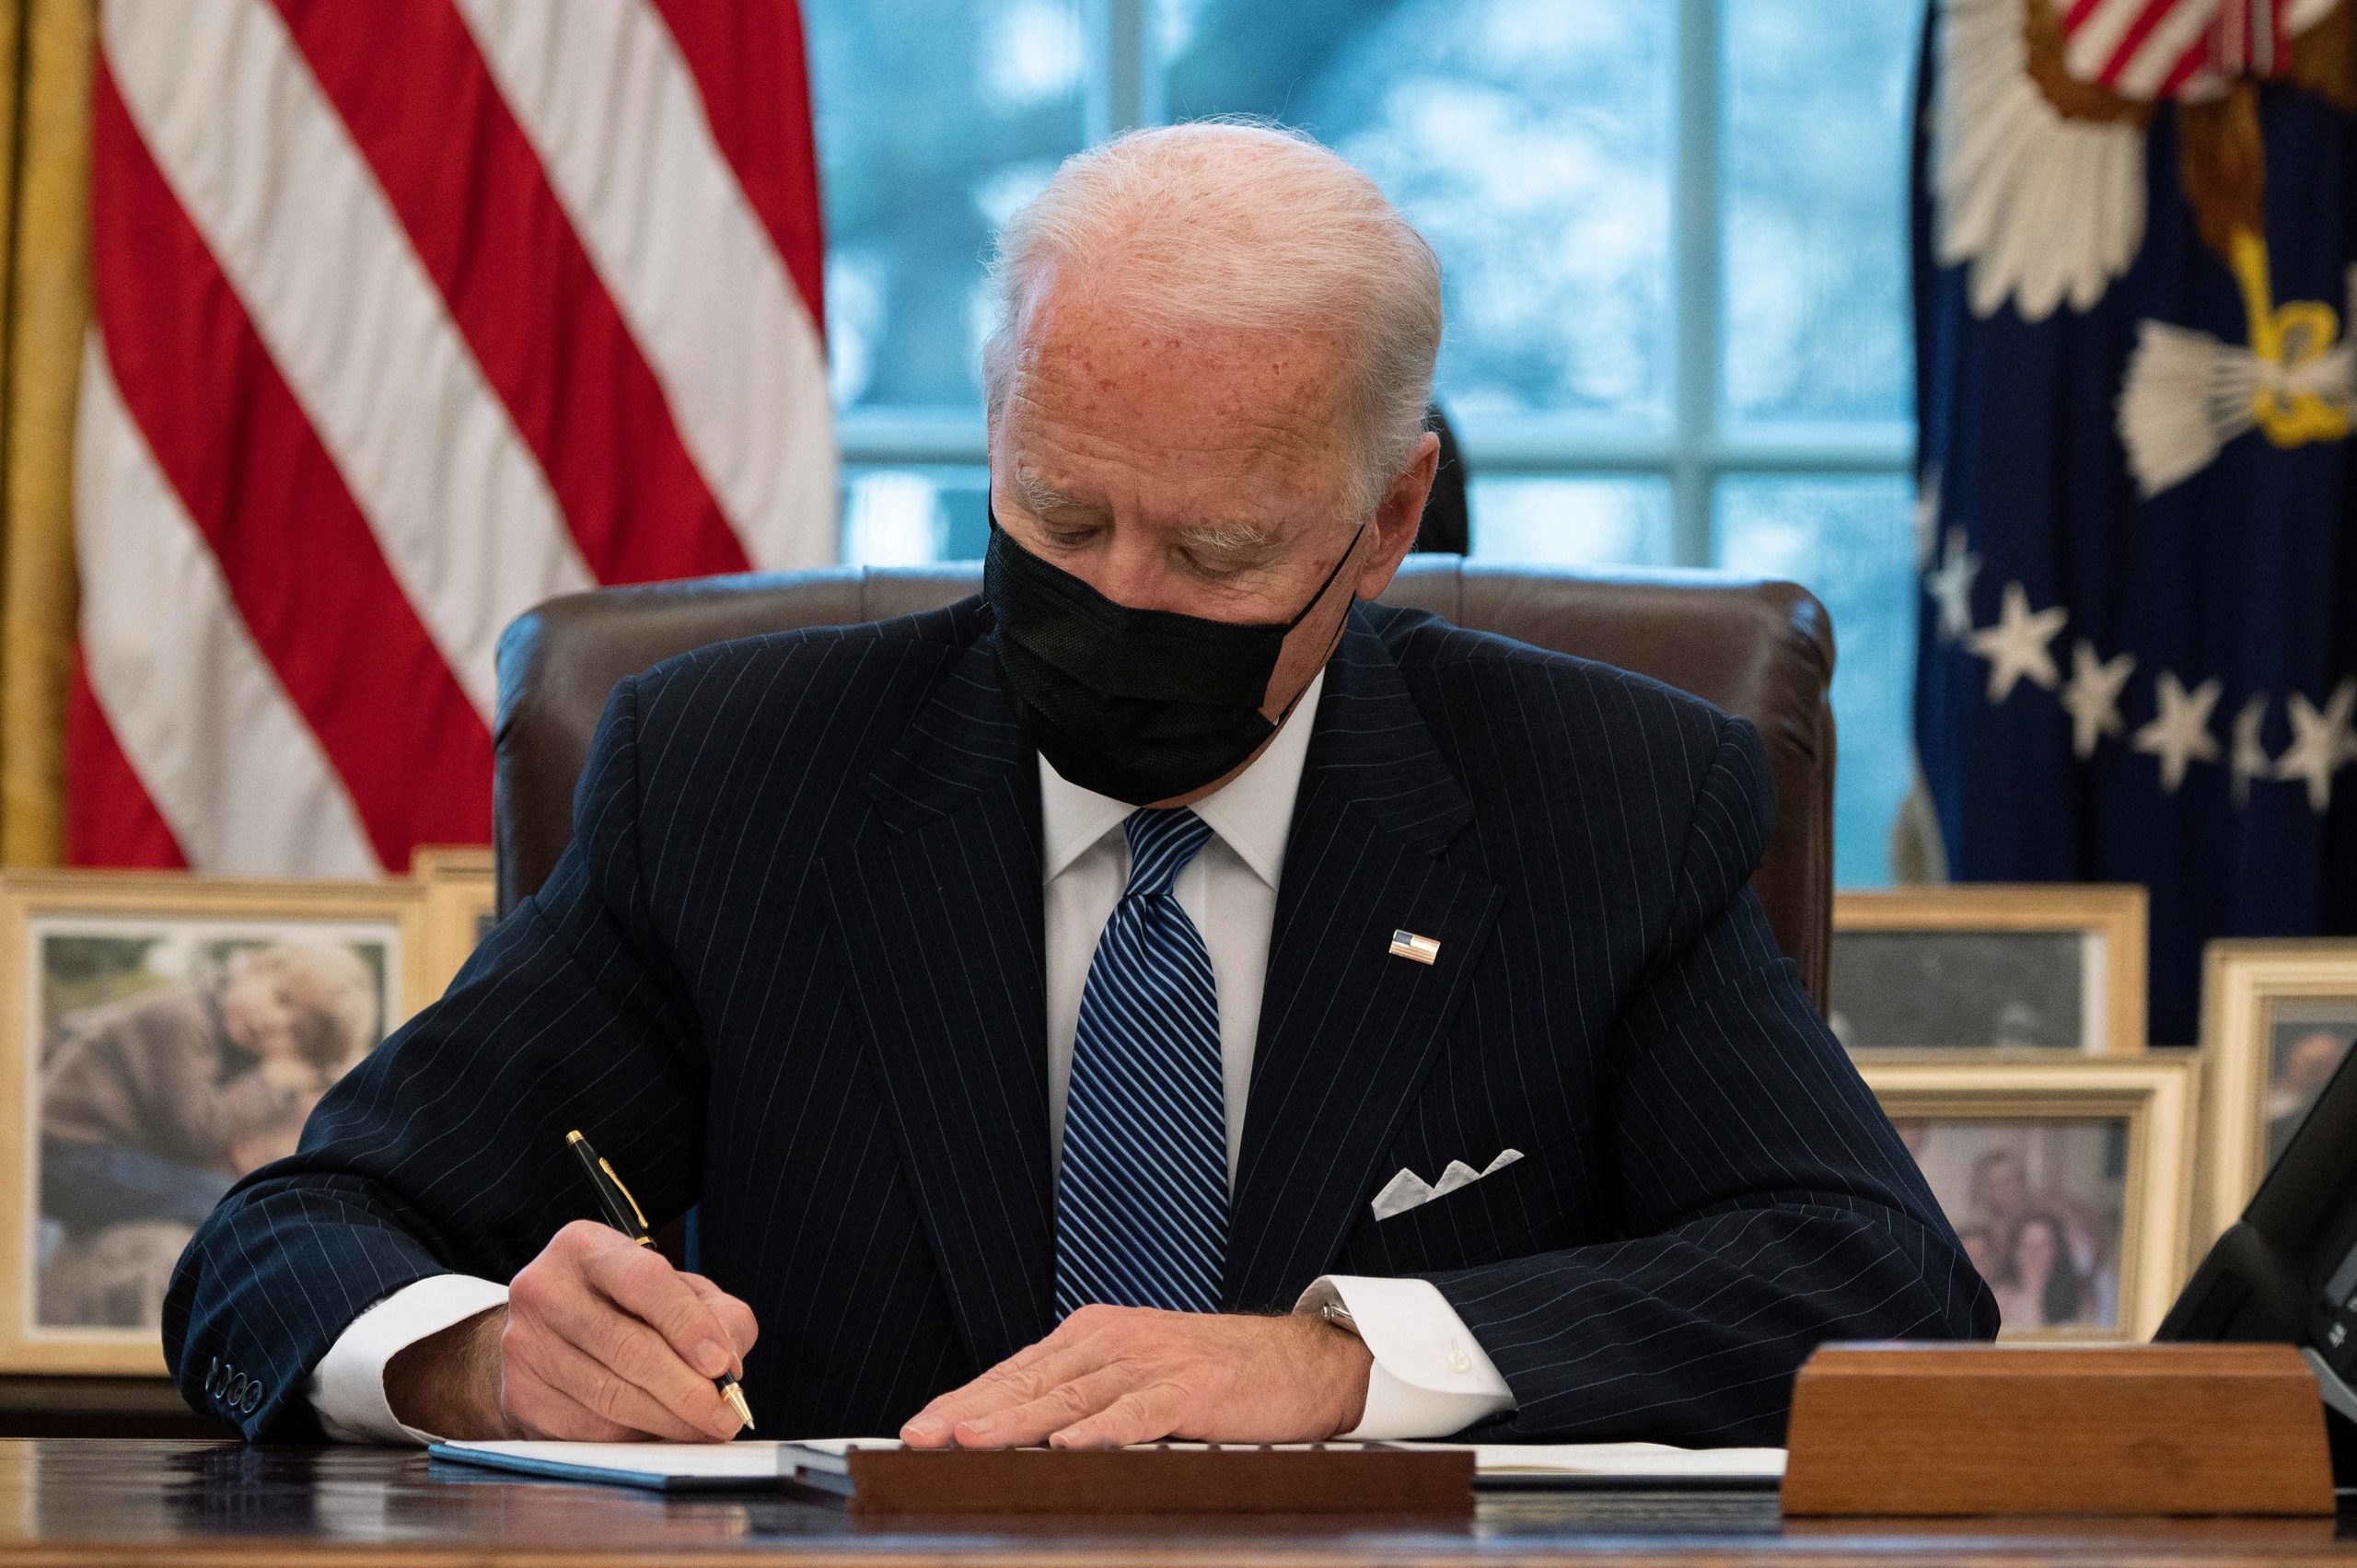 President Joe Biden signs an executive order at the White House on Jan. 25. (Jim Watson/AFP via Getty Images)